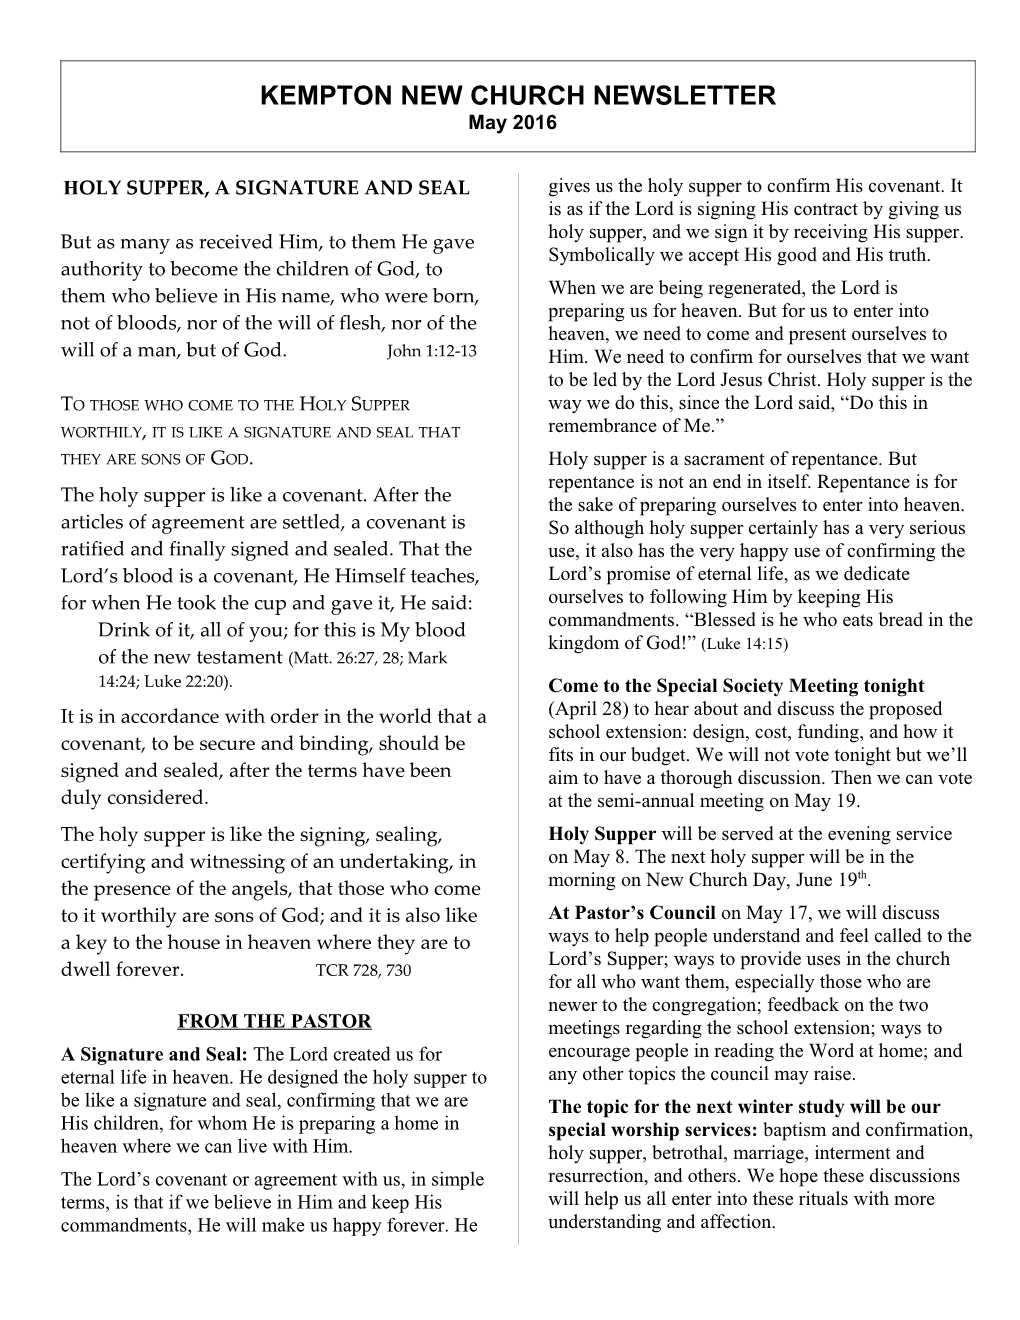 KEMPTON NEW CHURCH NEWSLETTER - May 2016 Page 2